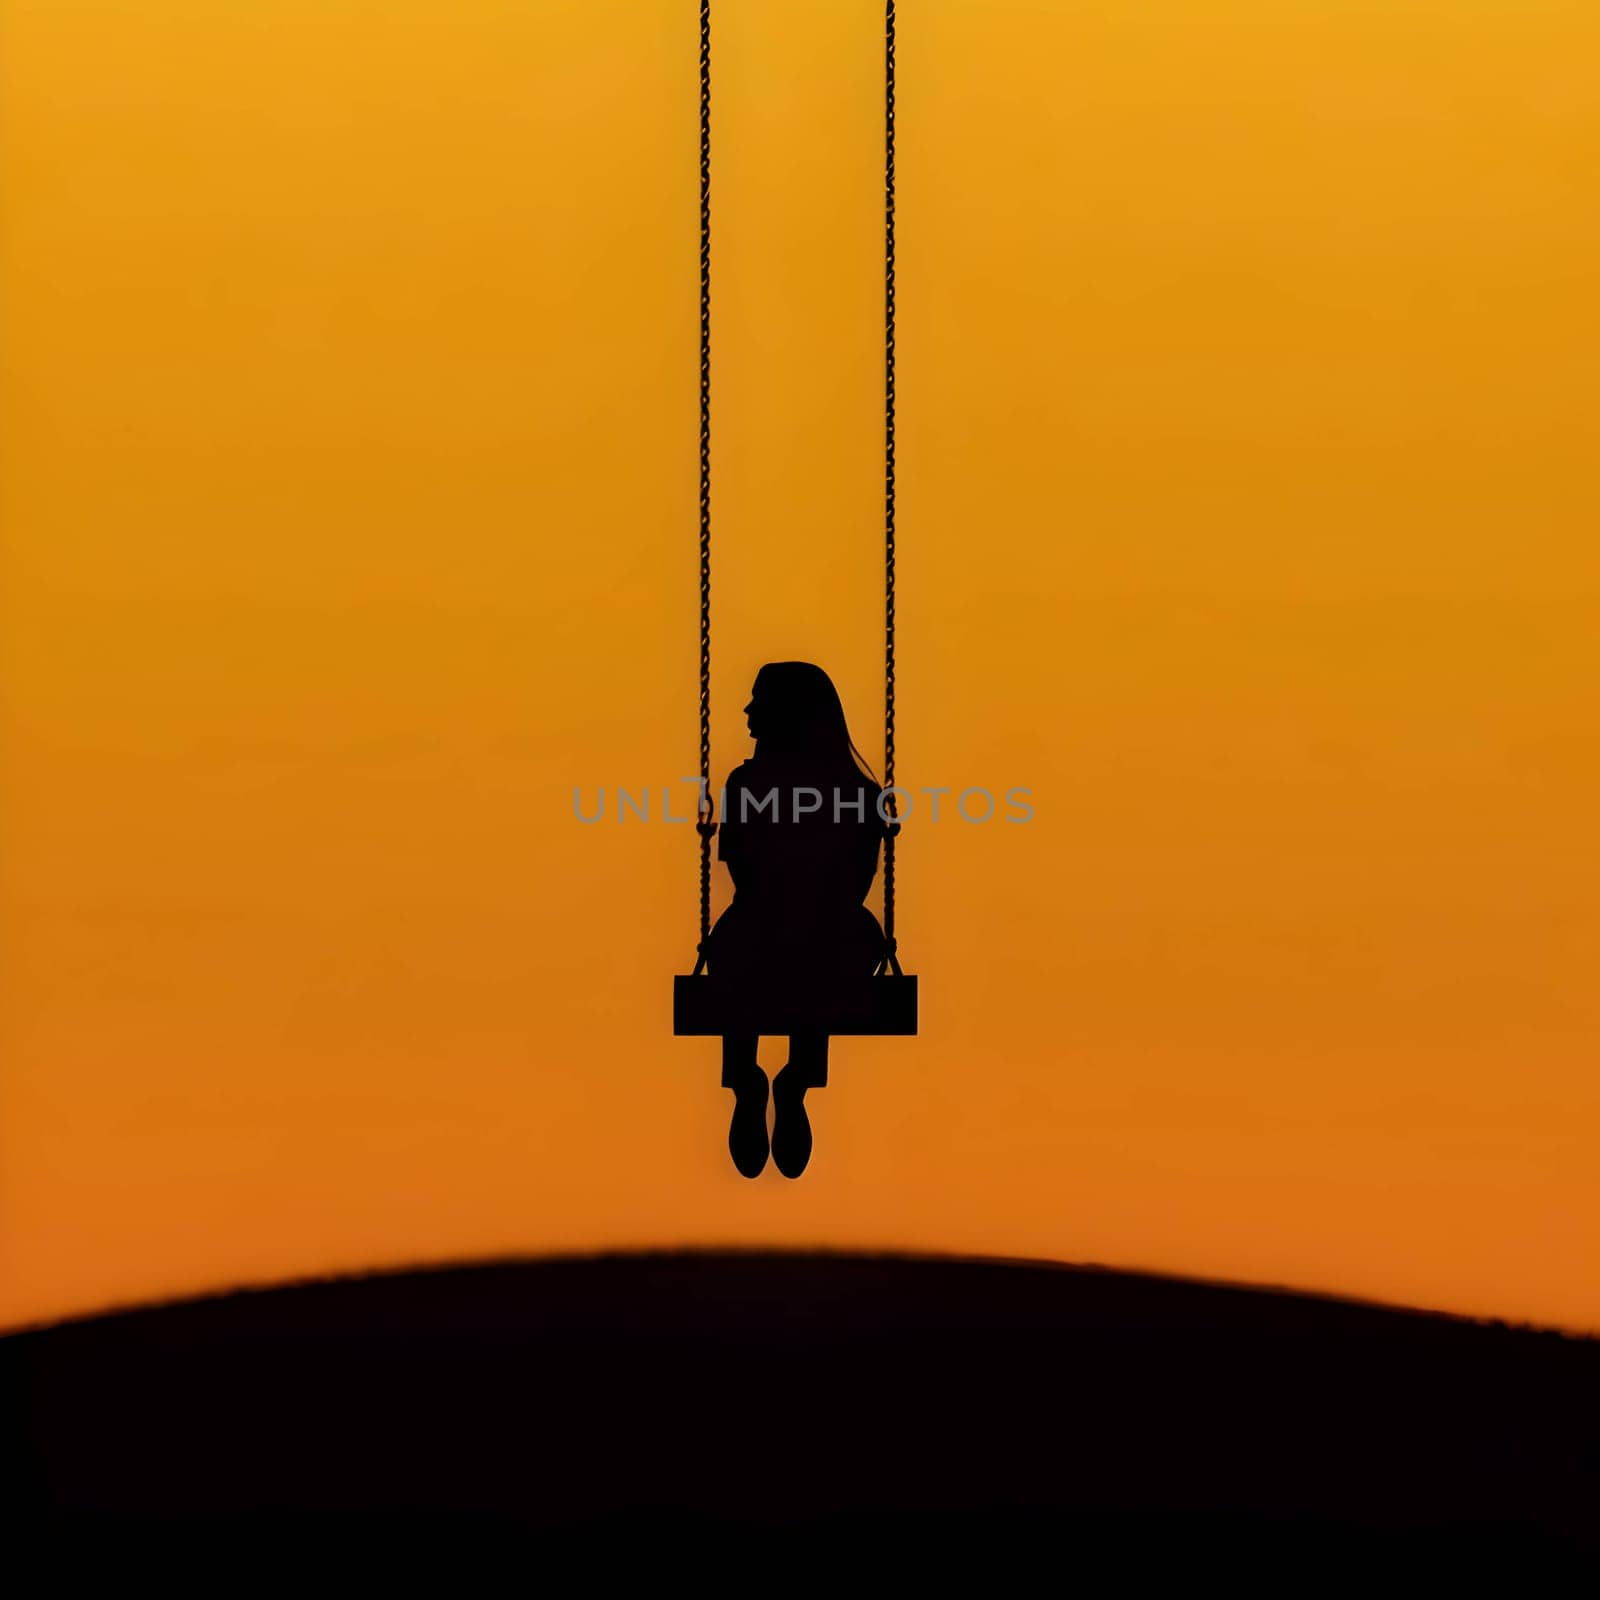 Vector illustration of a girl on a swing in black silhouette against a clean orange background, capturing graceful forms.